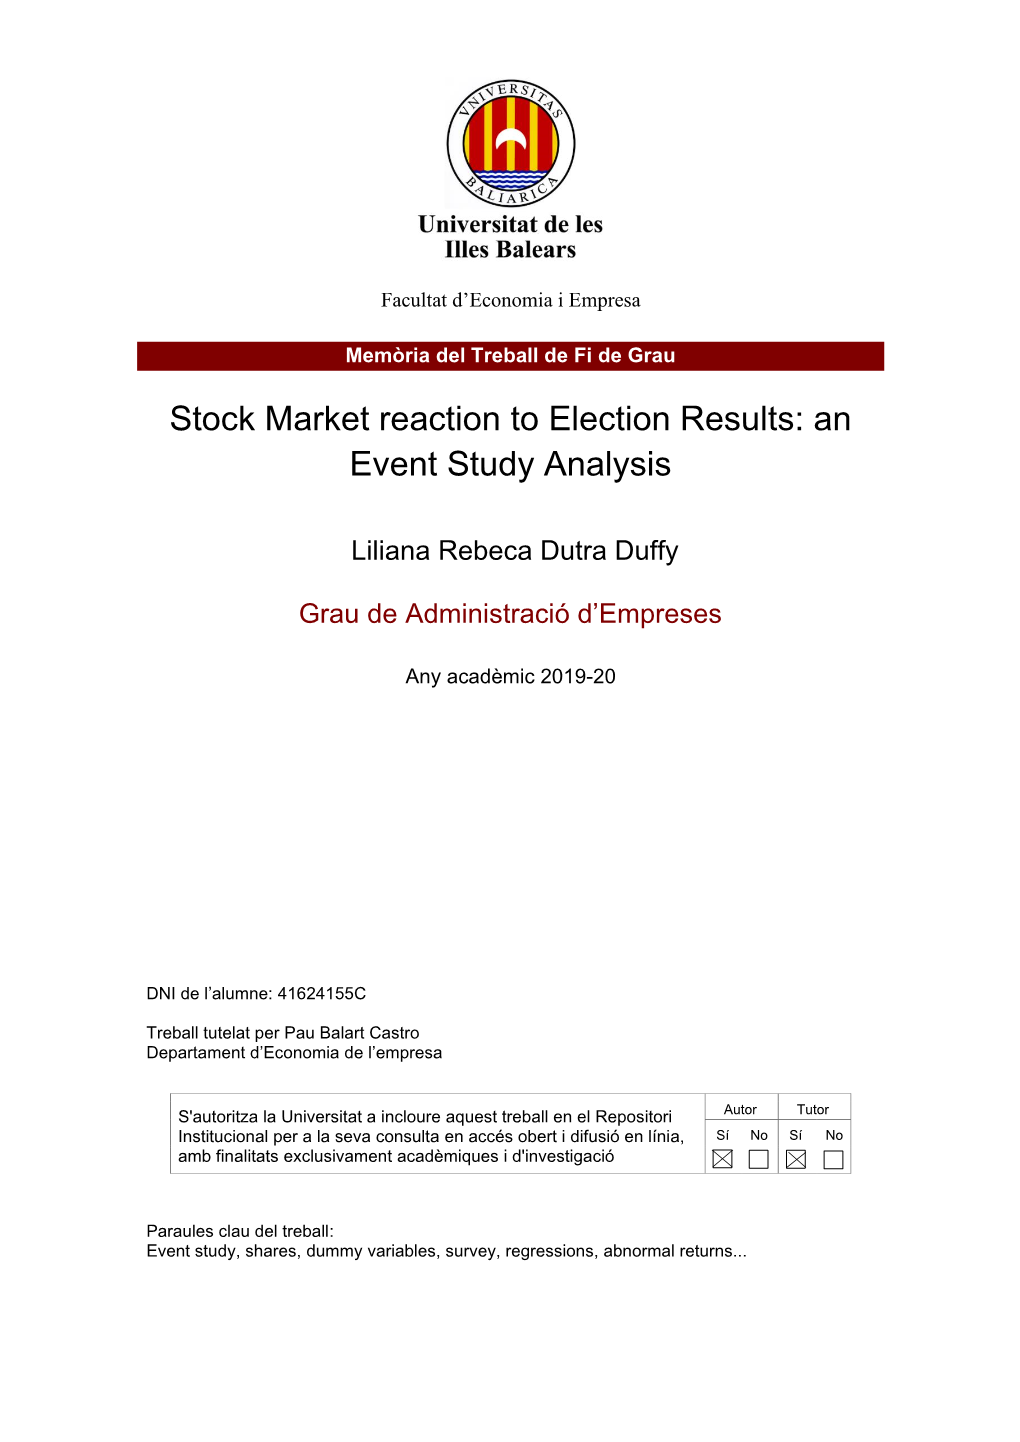 Stock Market Reaction to Election Results: an Event Study Analysis